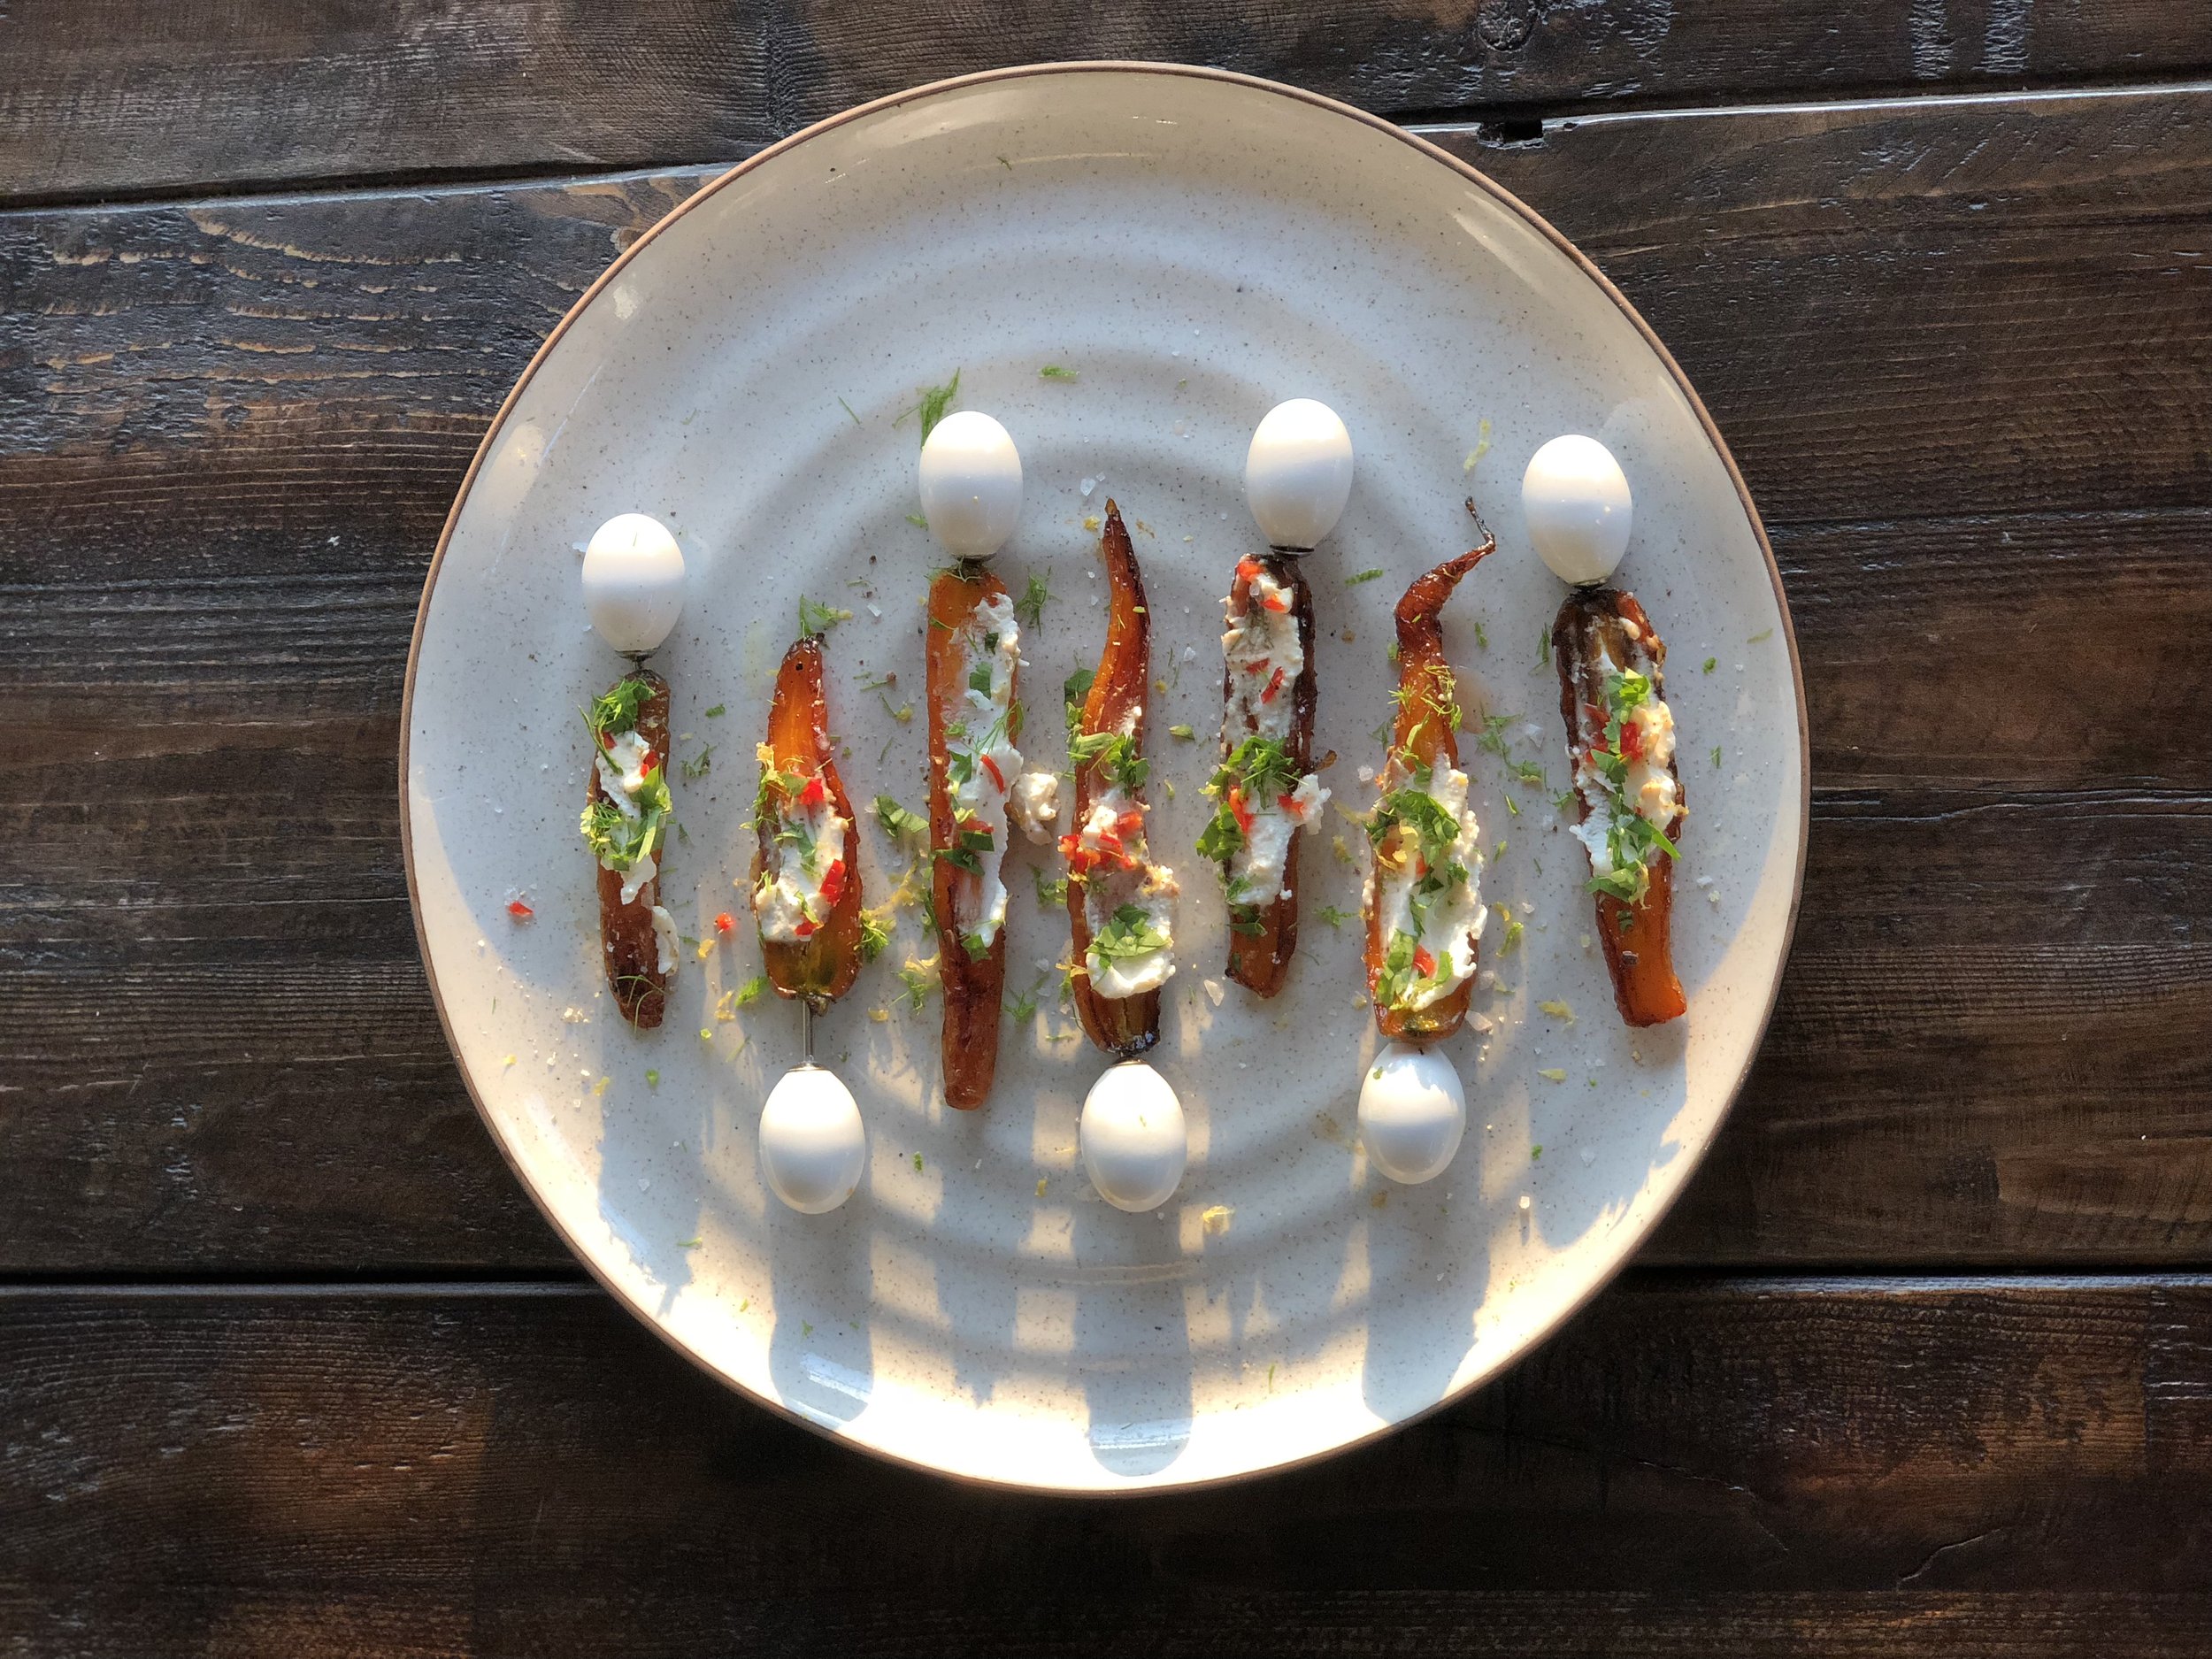 Honey and chipotle roasted carrot skewers with goatcheese, lime zest and pickled chilies